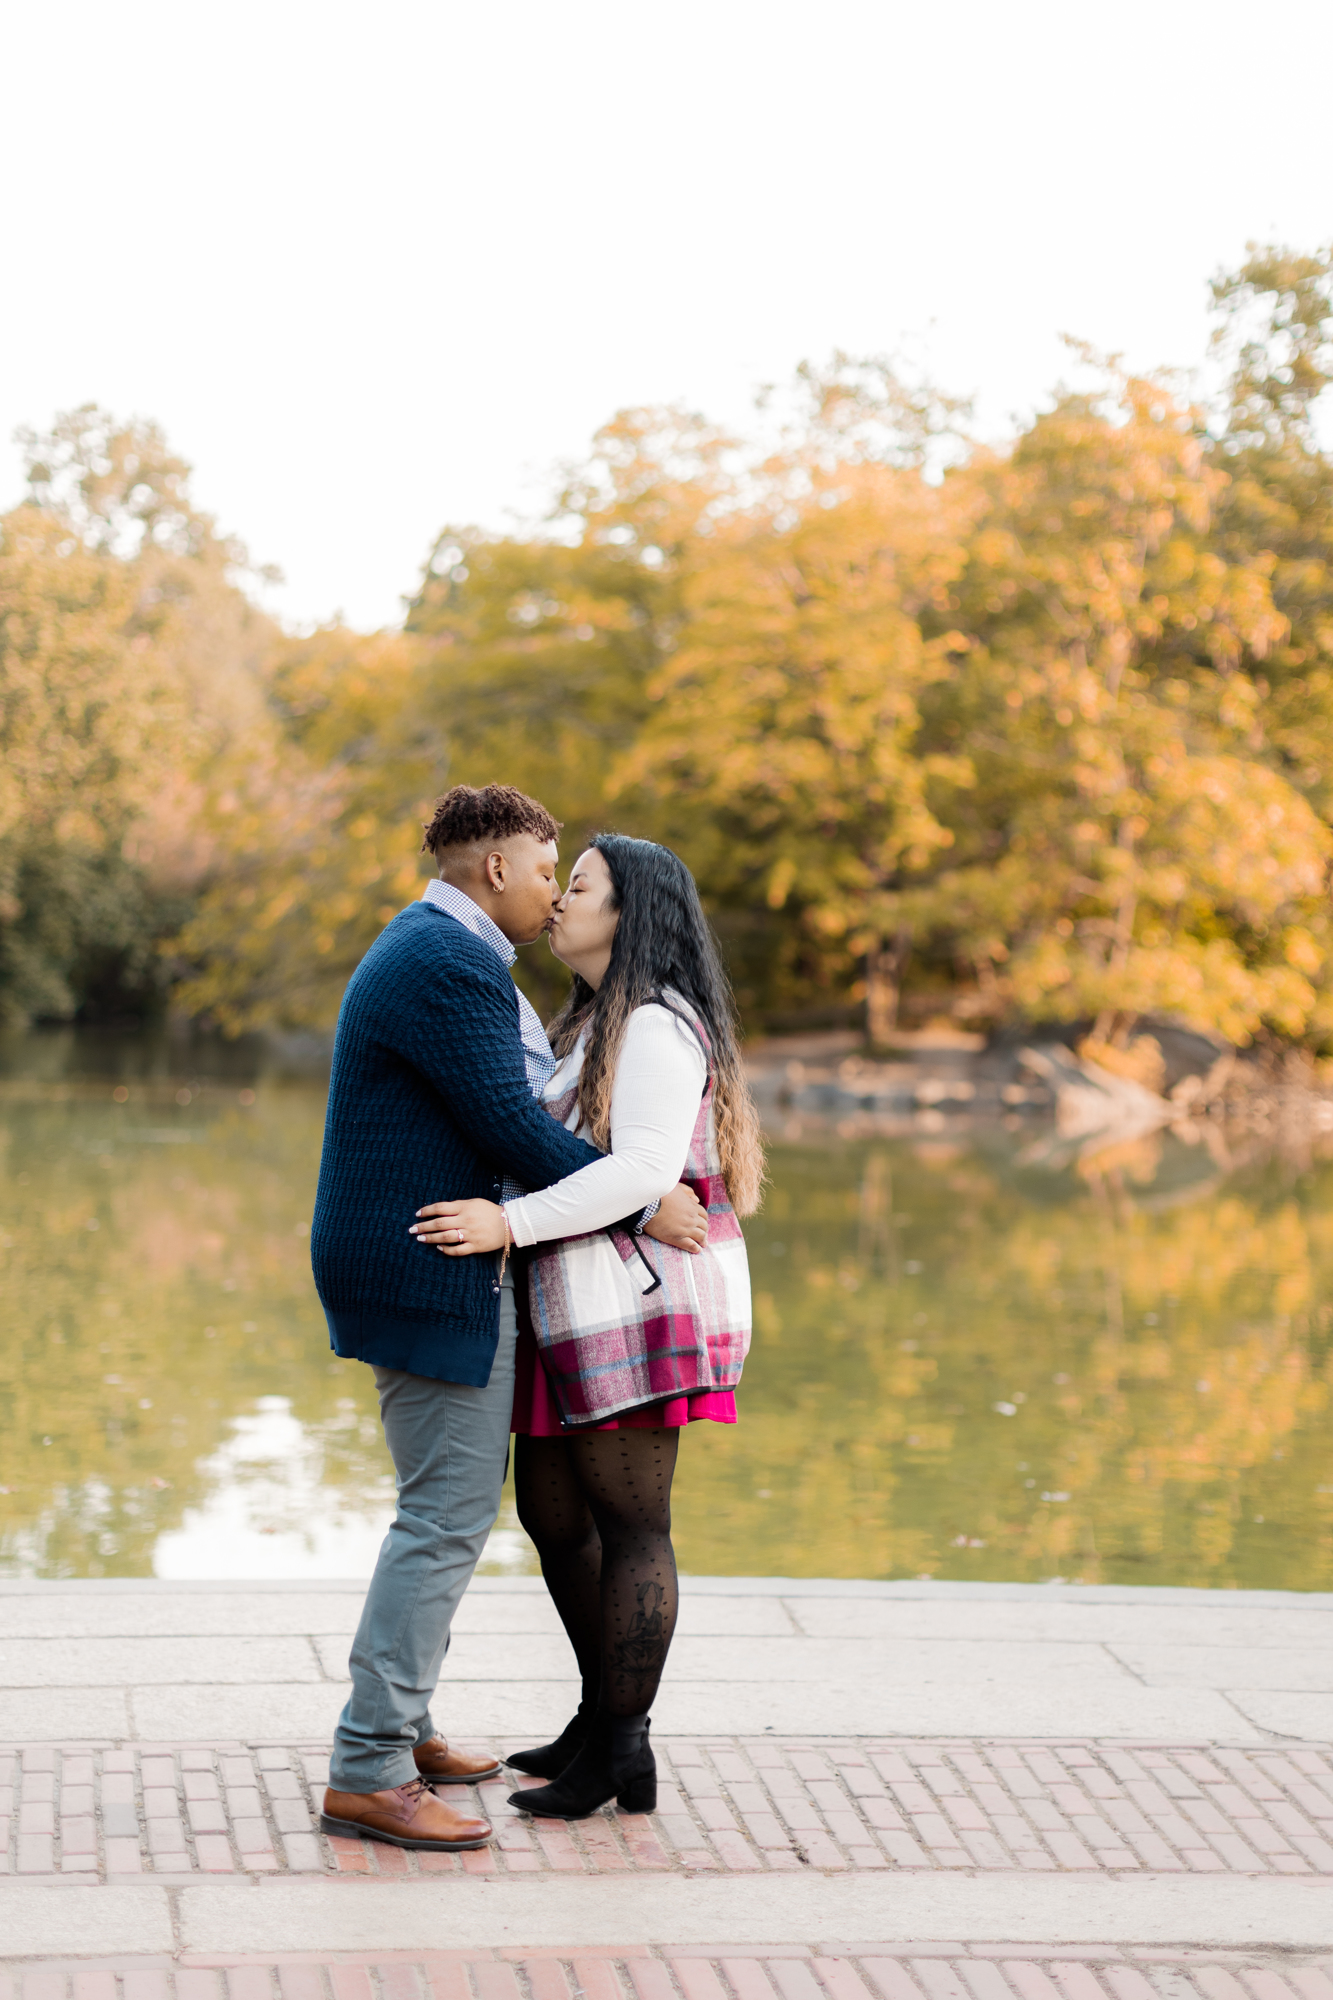 Special New York Engagement Photos